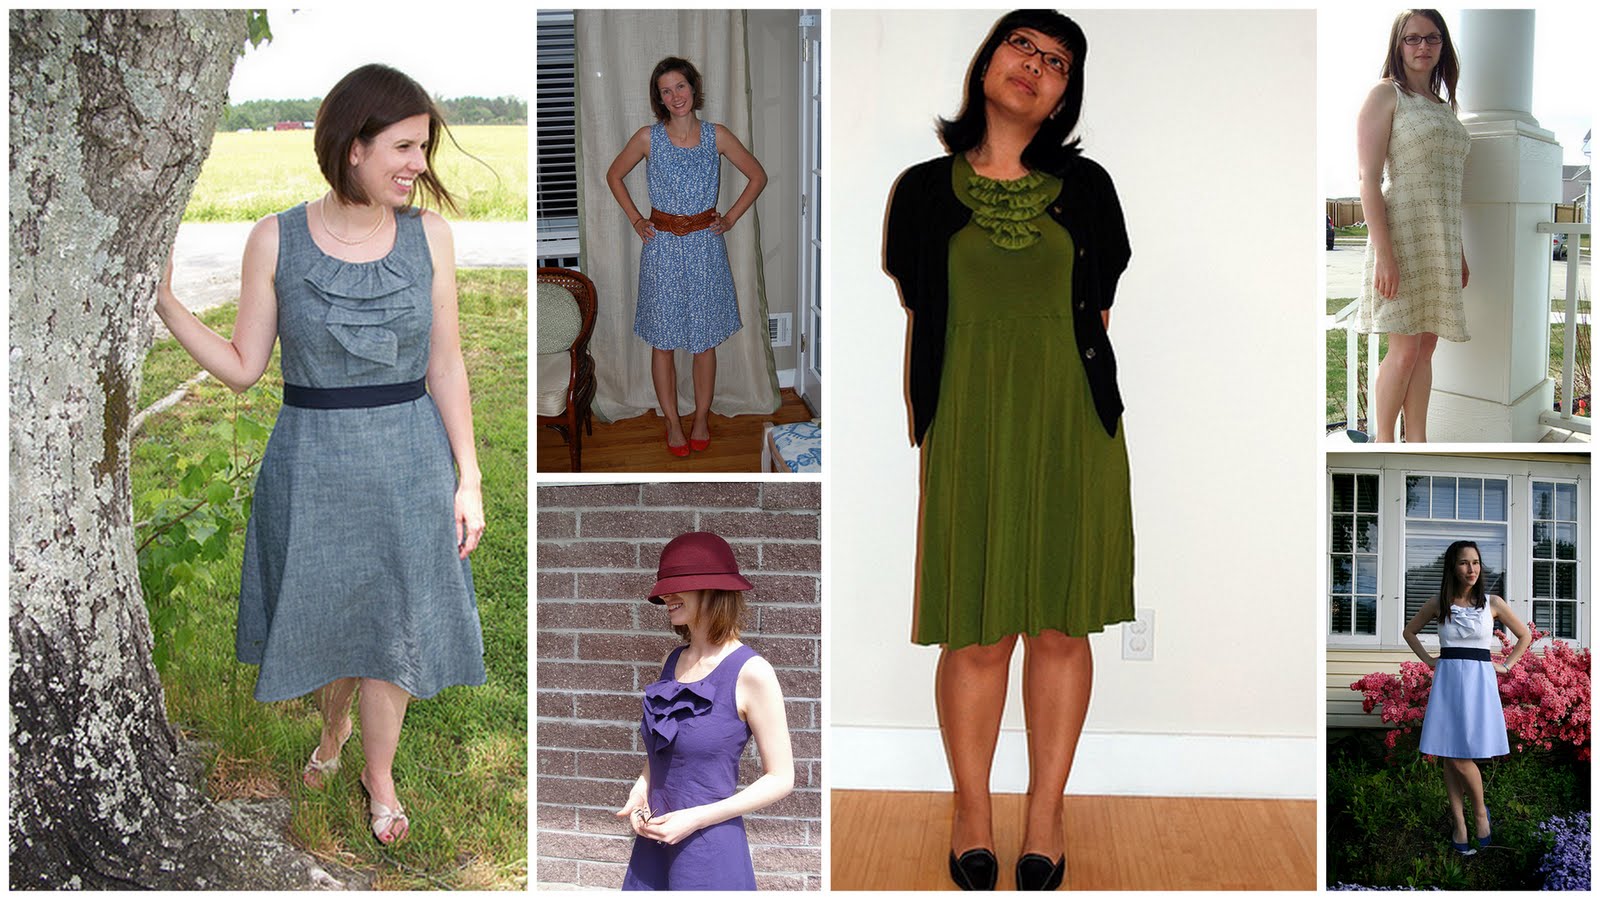 Grosgrain: Frock by Friday™ Sew Along on Flickr